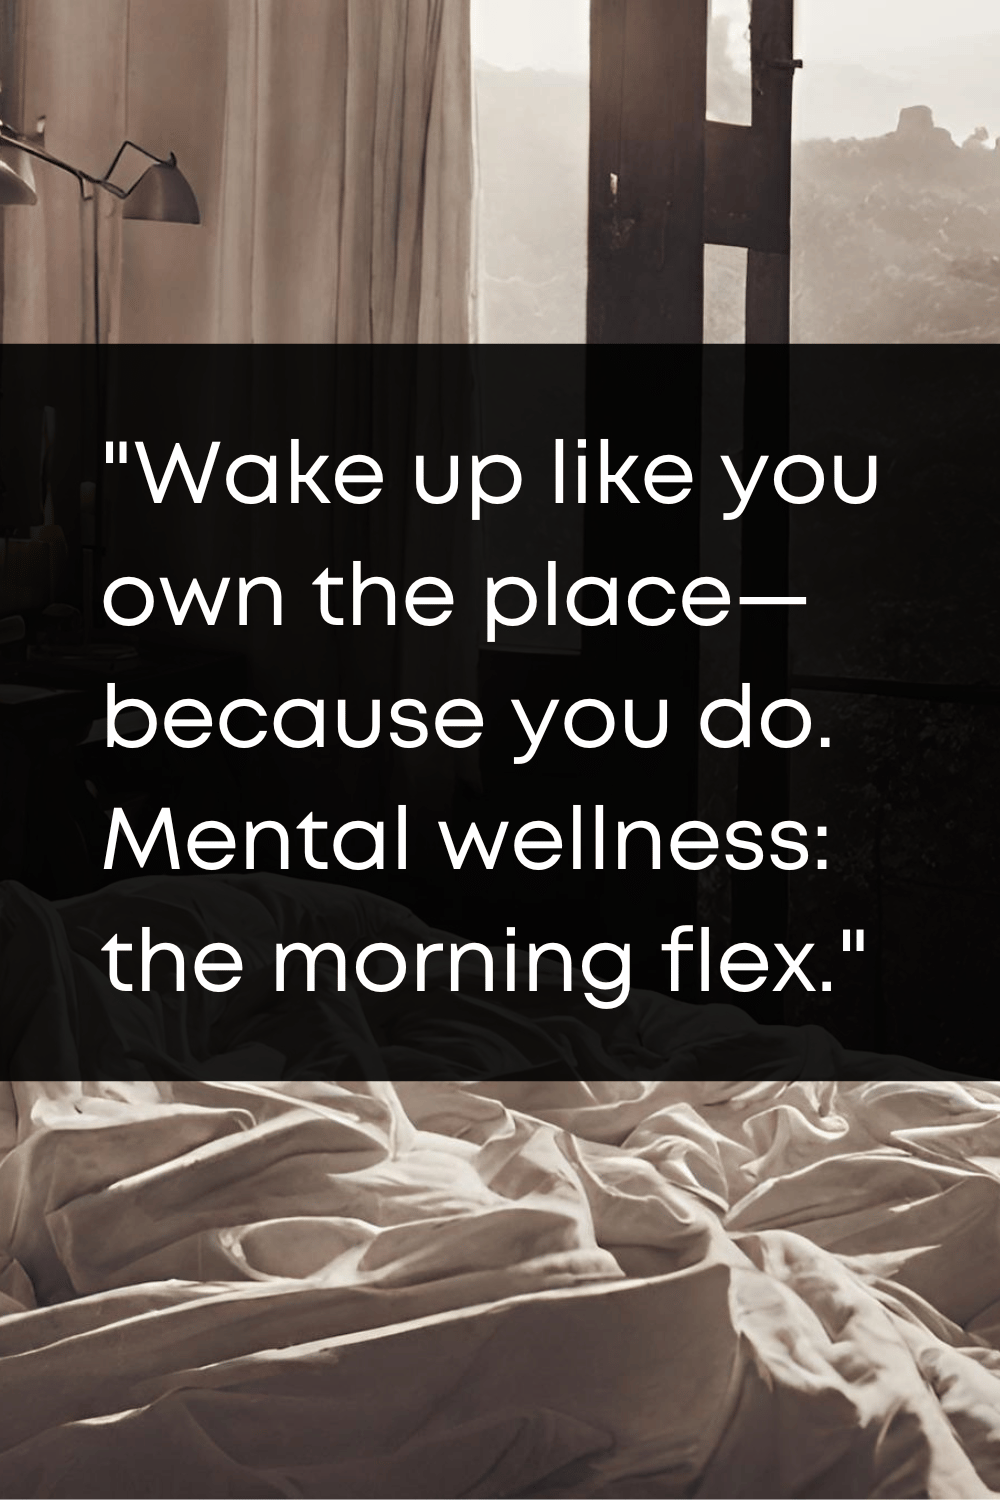 Unique-Good-Morning-Quotes-about-Mental-Wellness